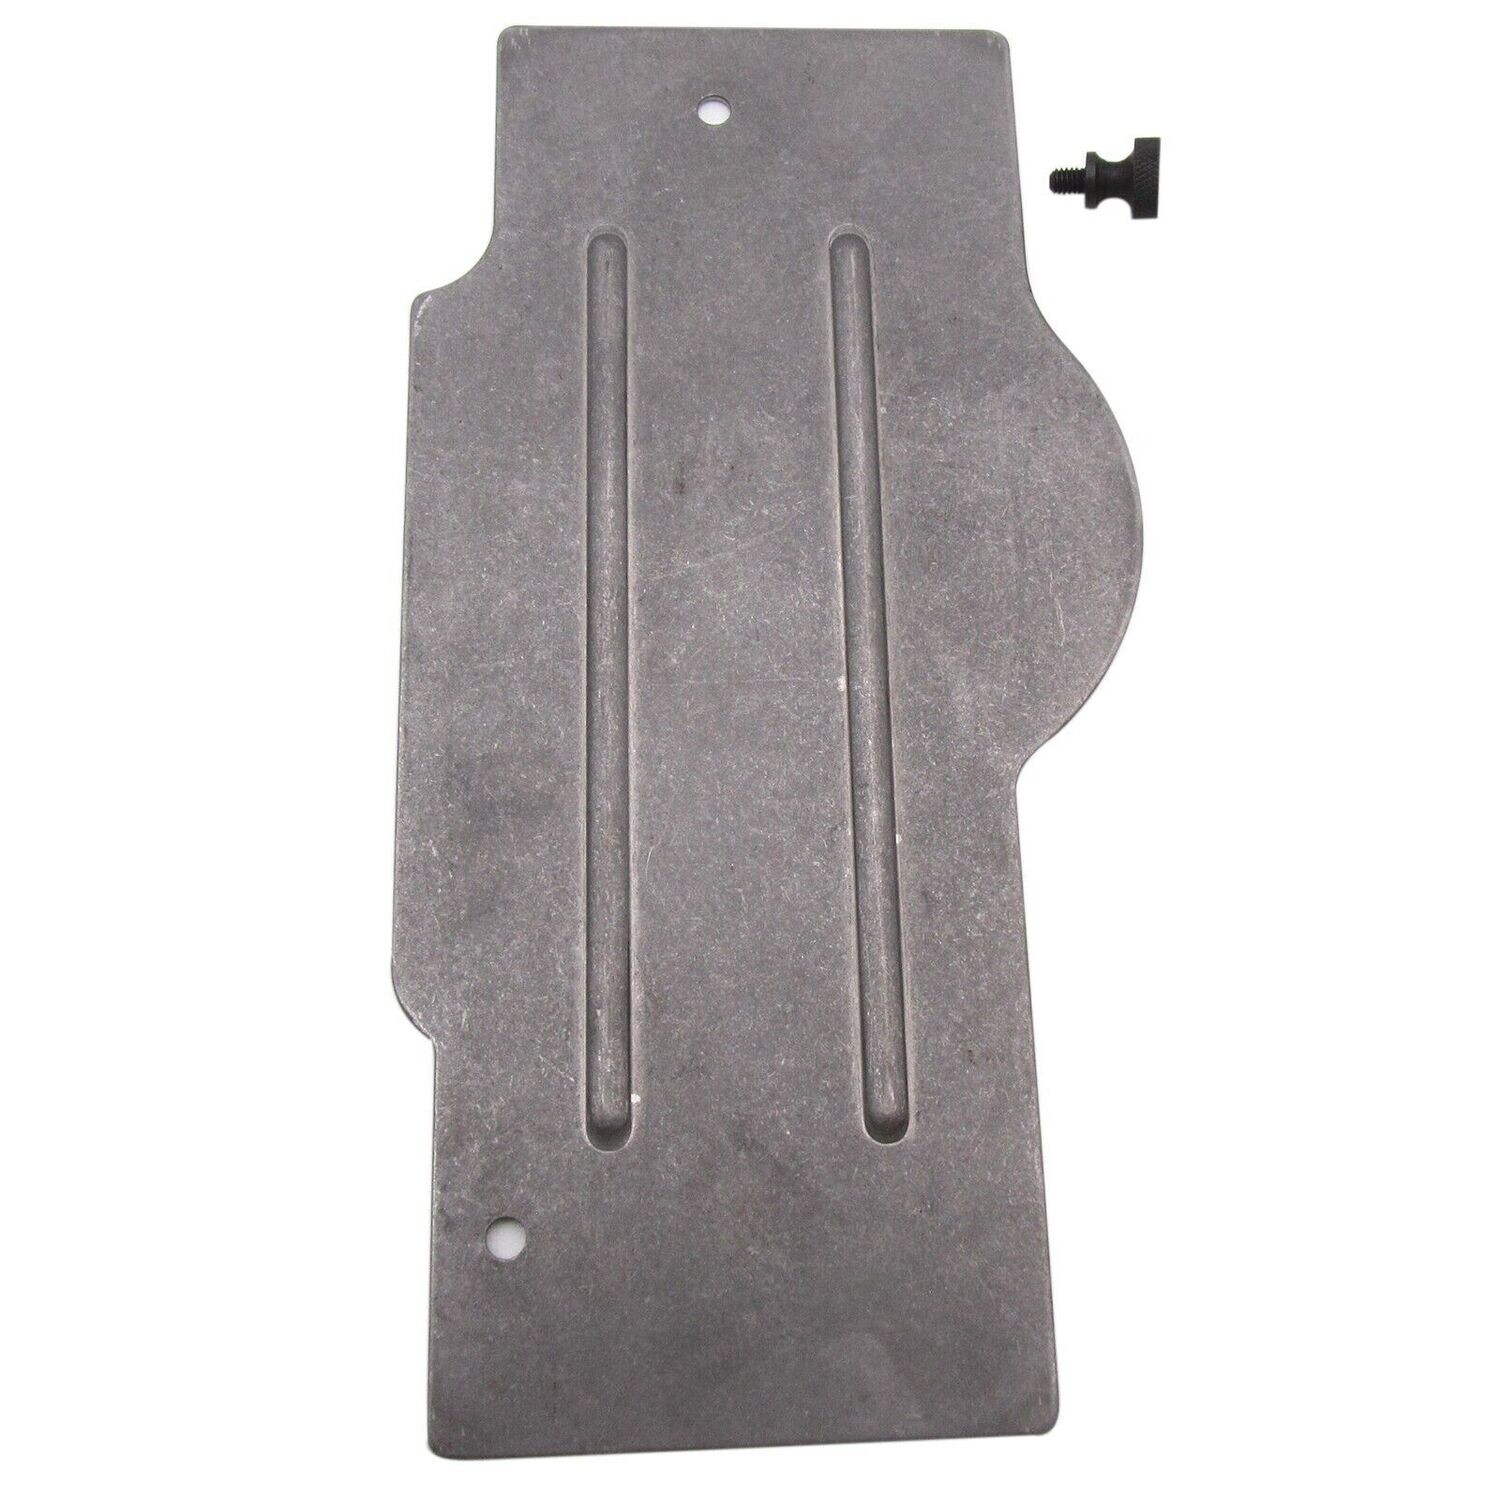 Face Plate for CONSEW & JUKI Industrial Walking Foot Sewing Machines.